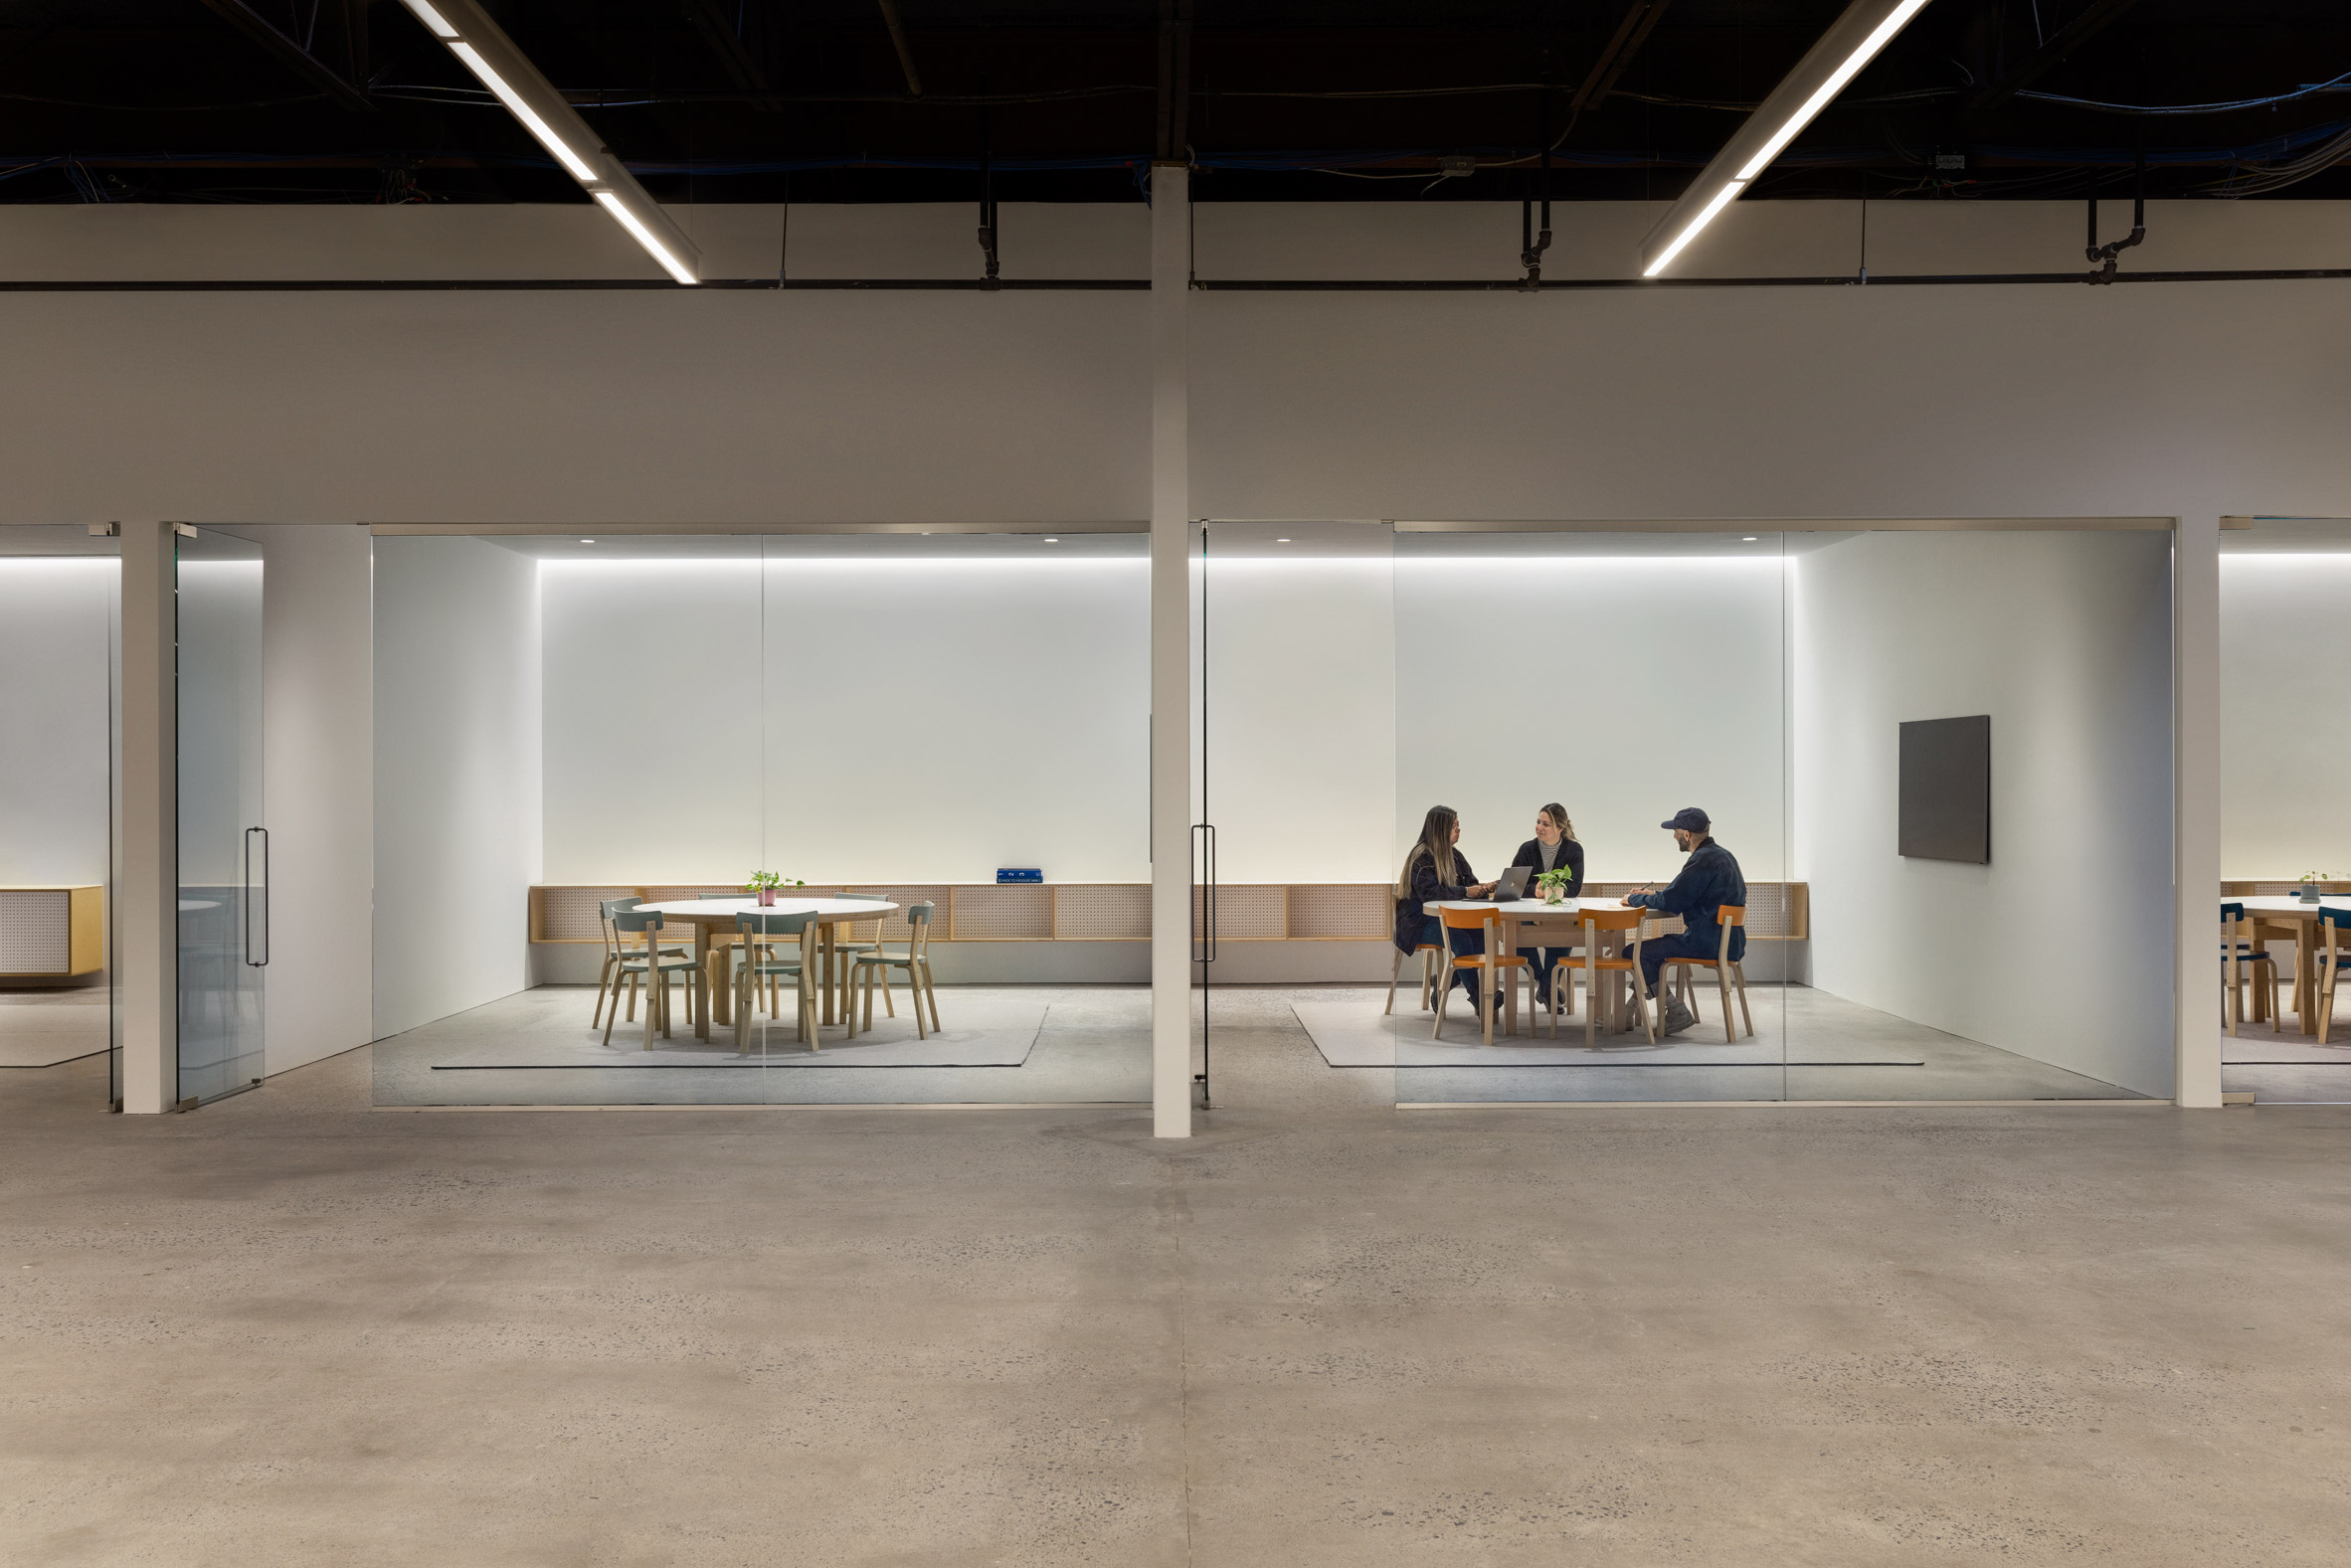 Offices with glass walls and industrial ceilings